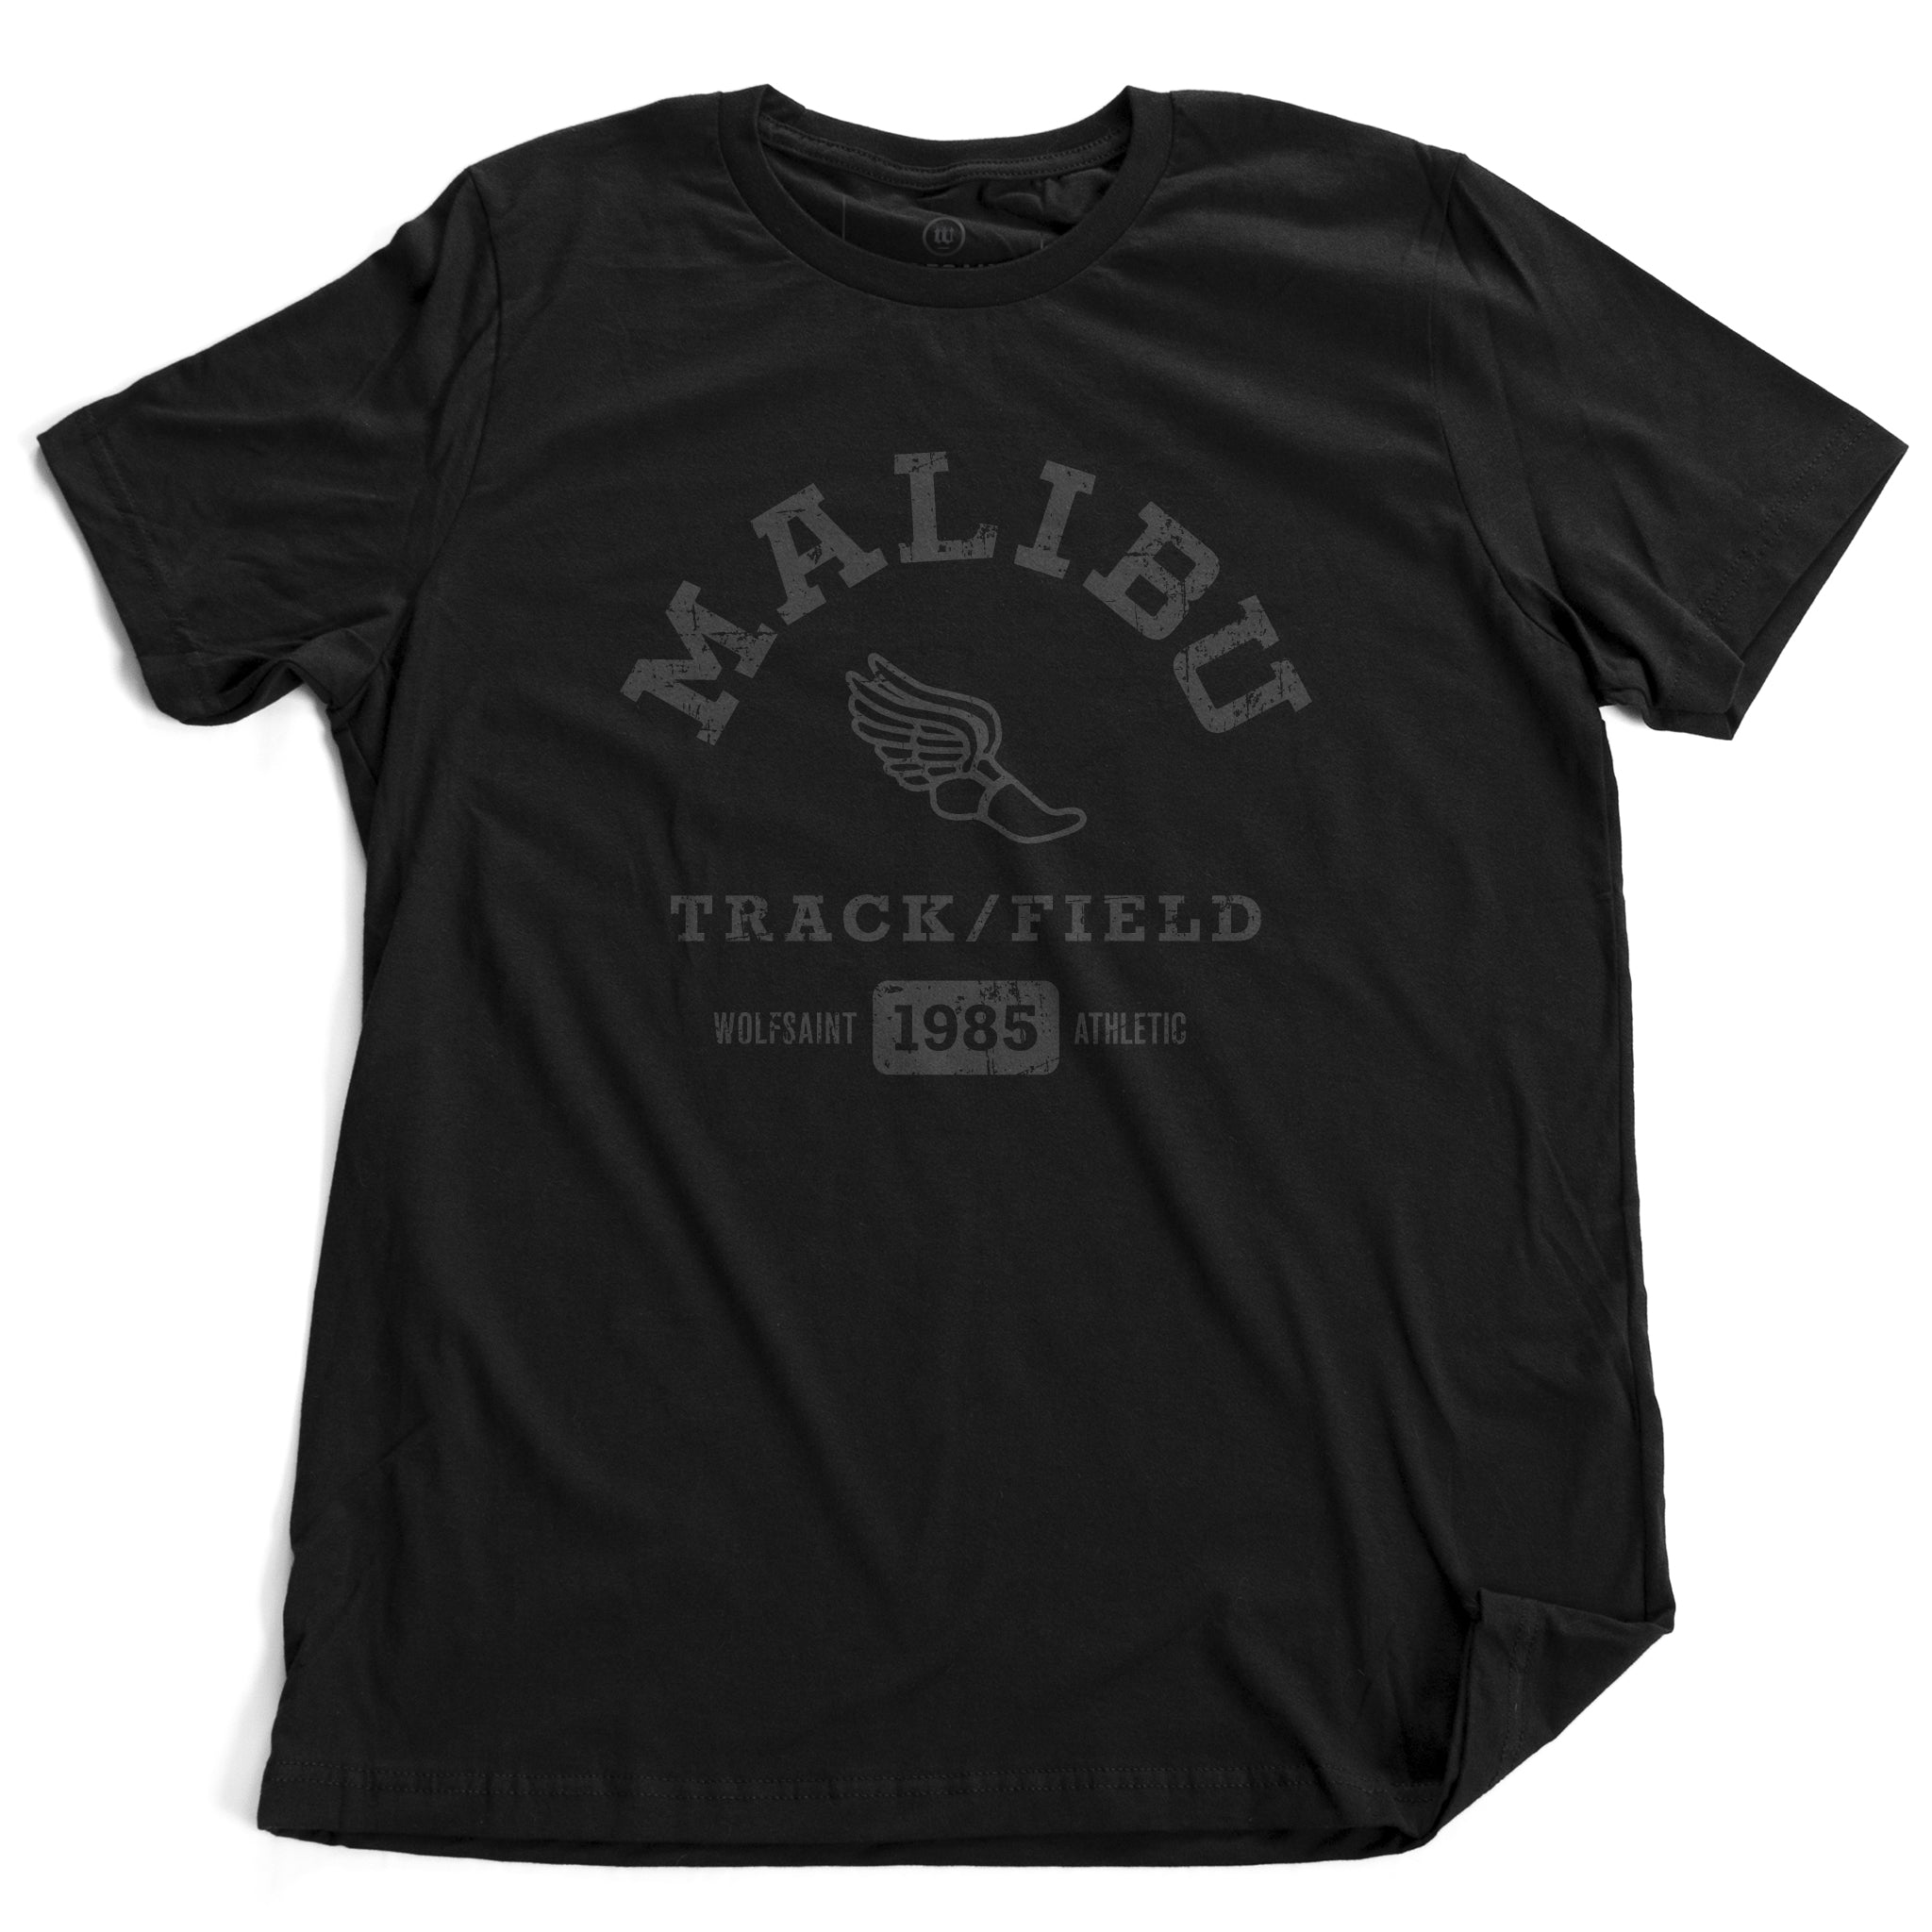 A fashionable, vintage-inspired retro t-shirt in Classic Black, featuring a graphic representing a sarcastic and fictitious Malibu (California) Track and Field team. From wolfsaint.net